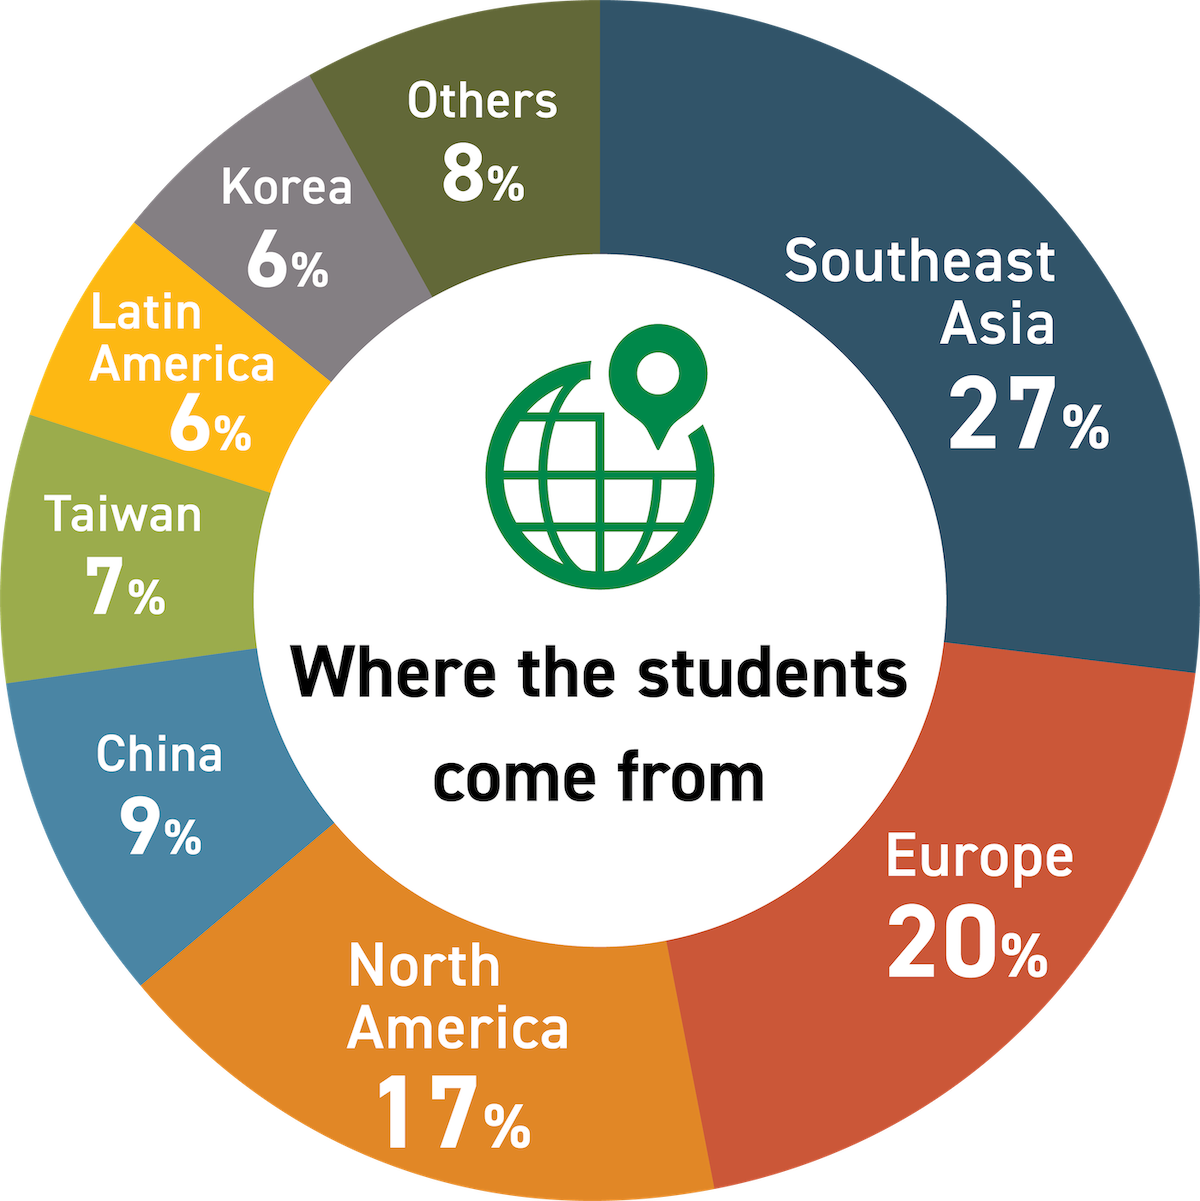 Percentage of students by region